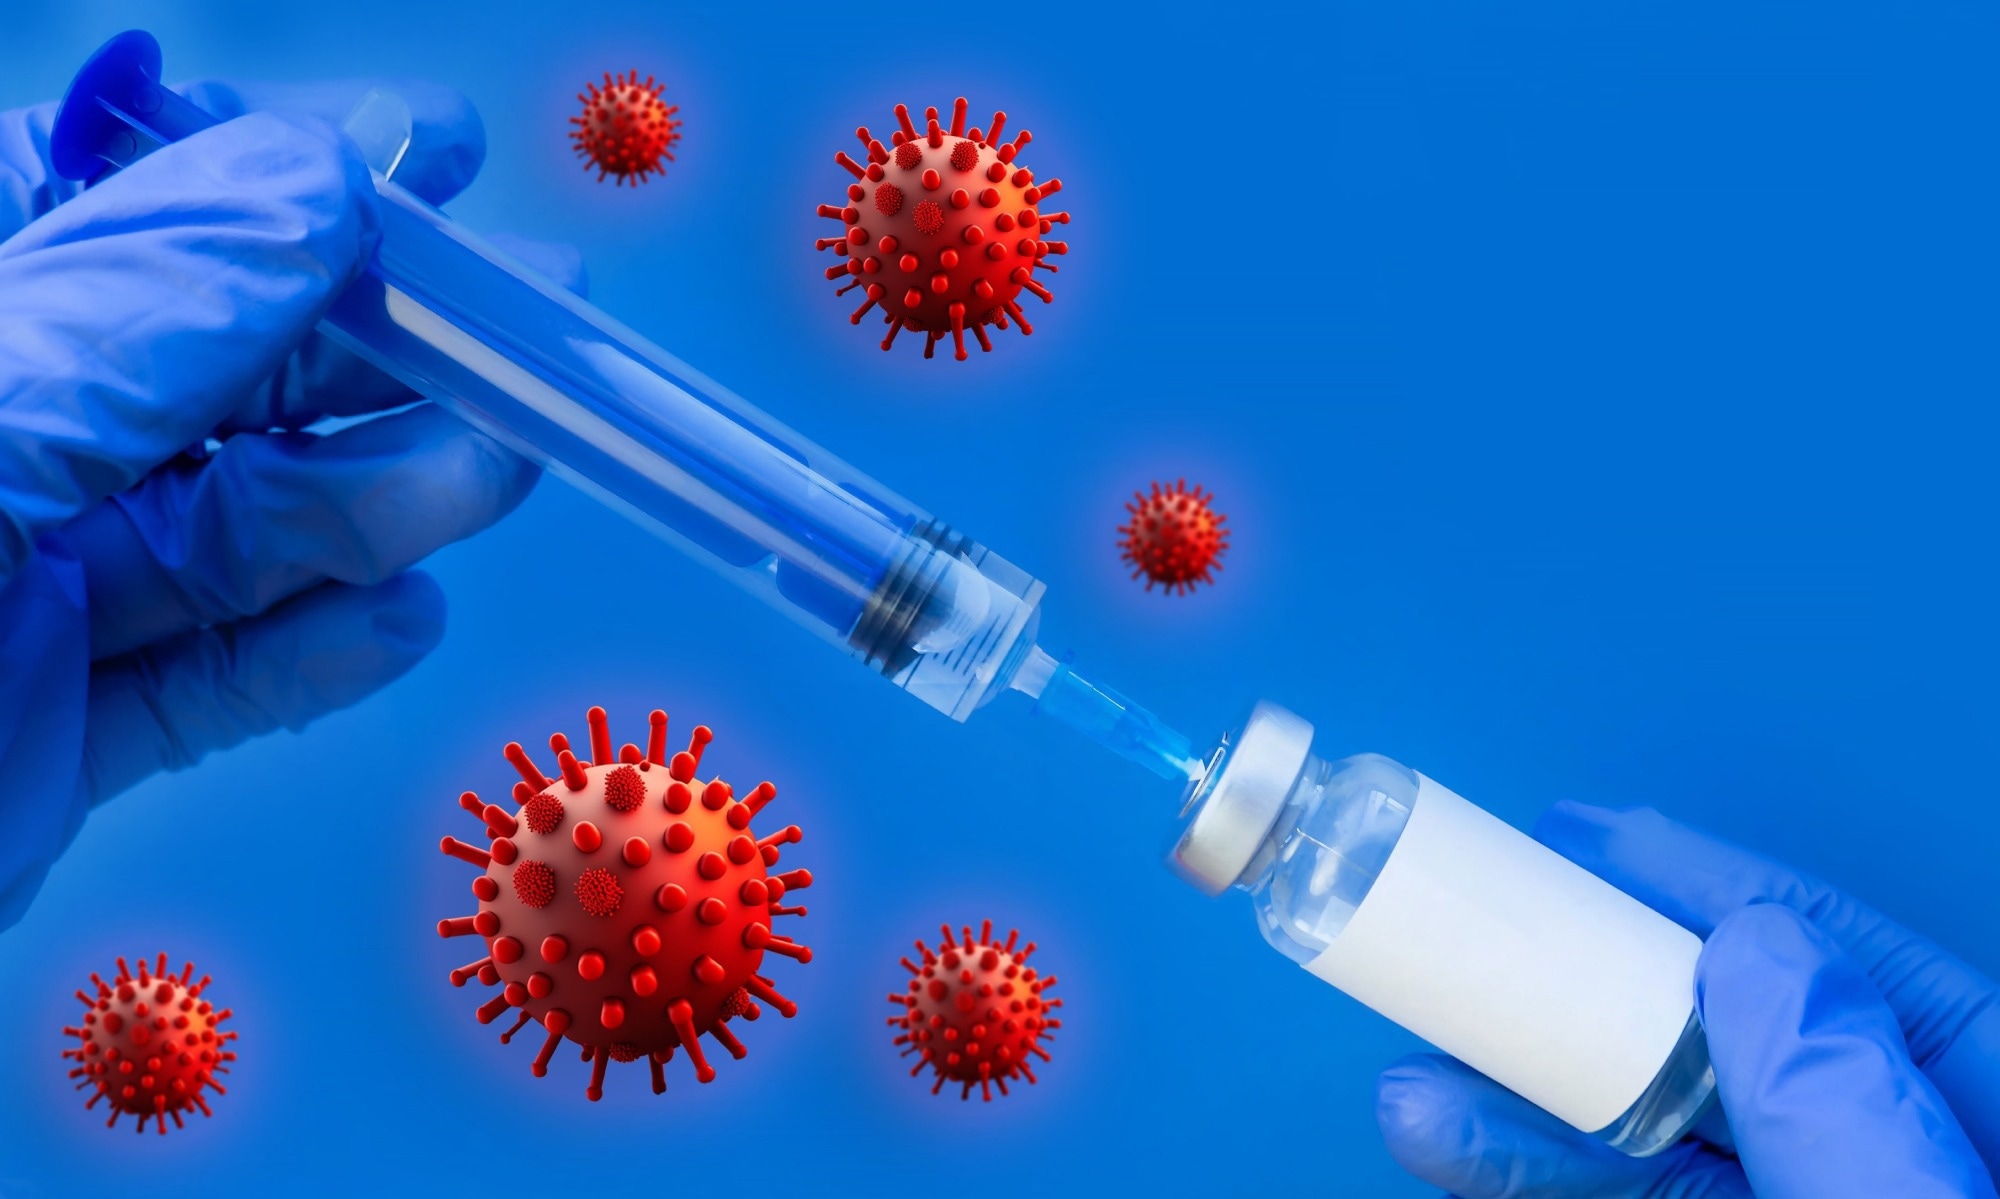 Study: The safety and immunogenicity of vaccines administered to pregnant women living with HIV: a systematic review and meta-analysis. Image Credit: Hit Stop Media / Shutterstock